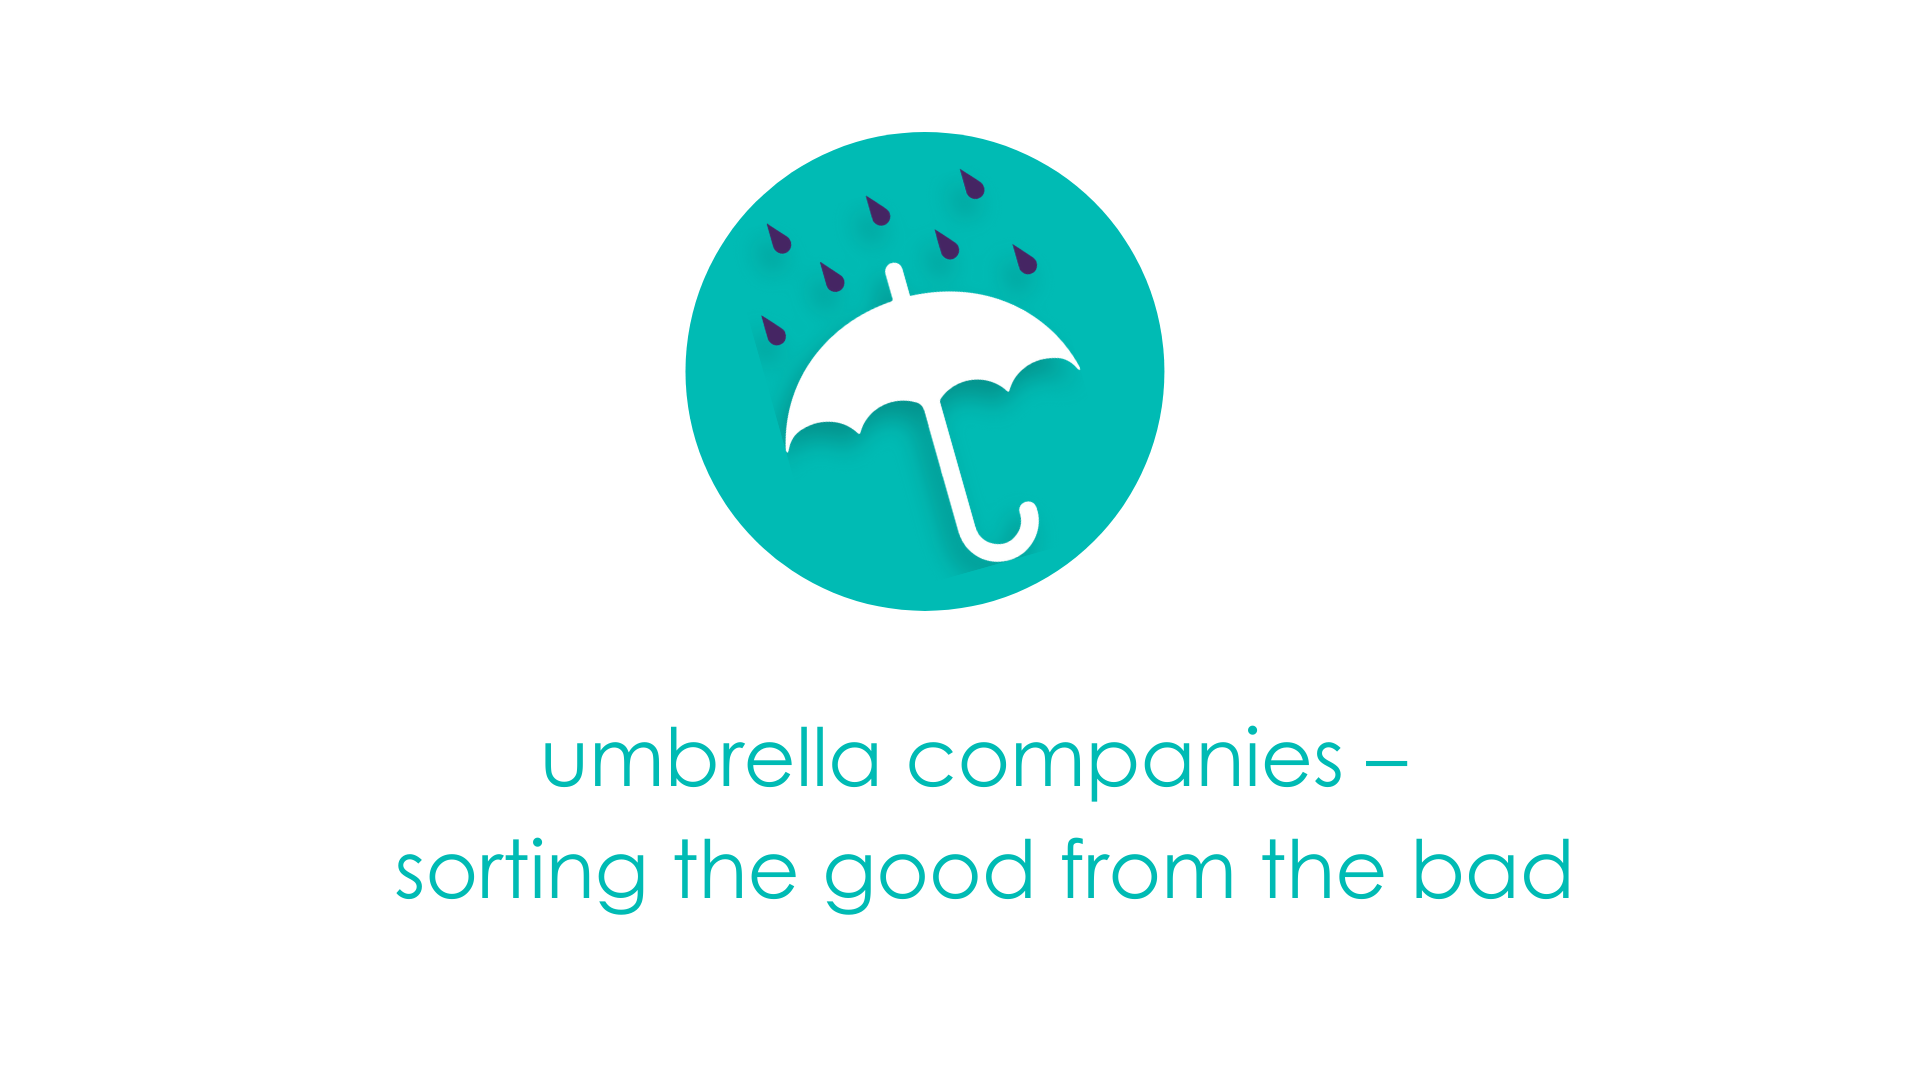 Umbrella companies – sorting the good from the bad